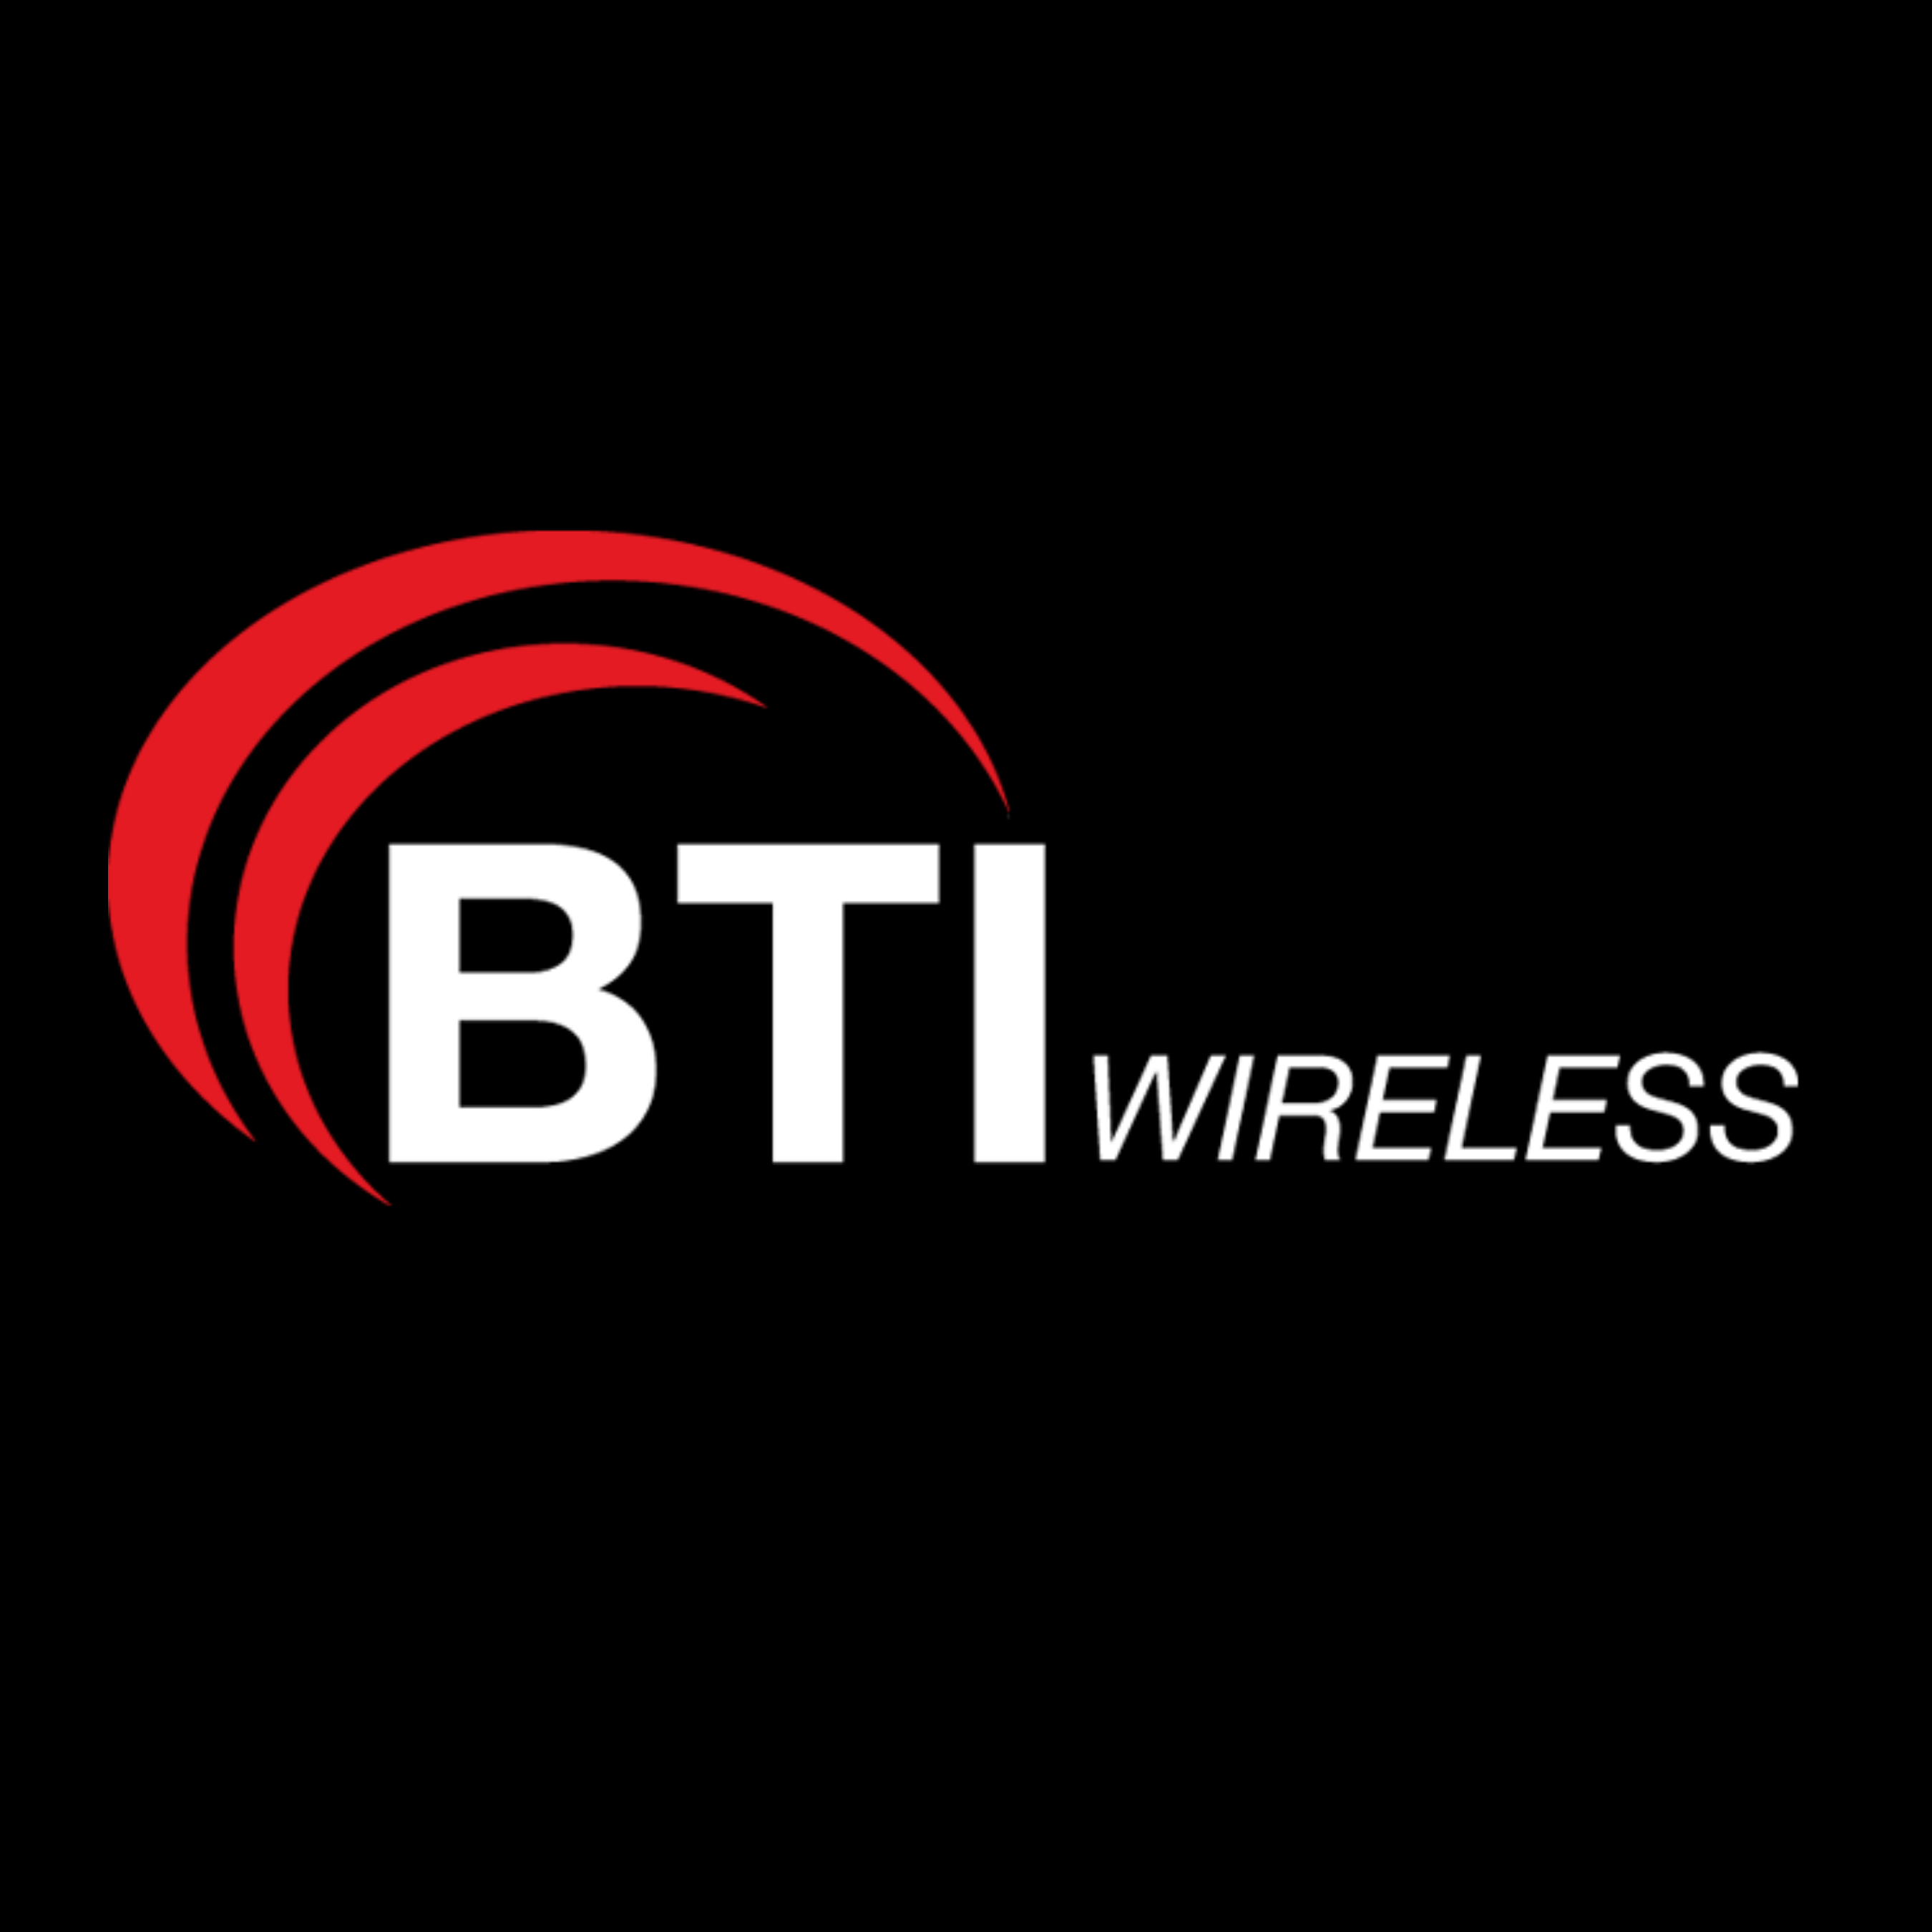 BTI Wireless Announces Acquisition by Star Solutions Inc.